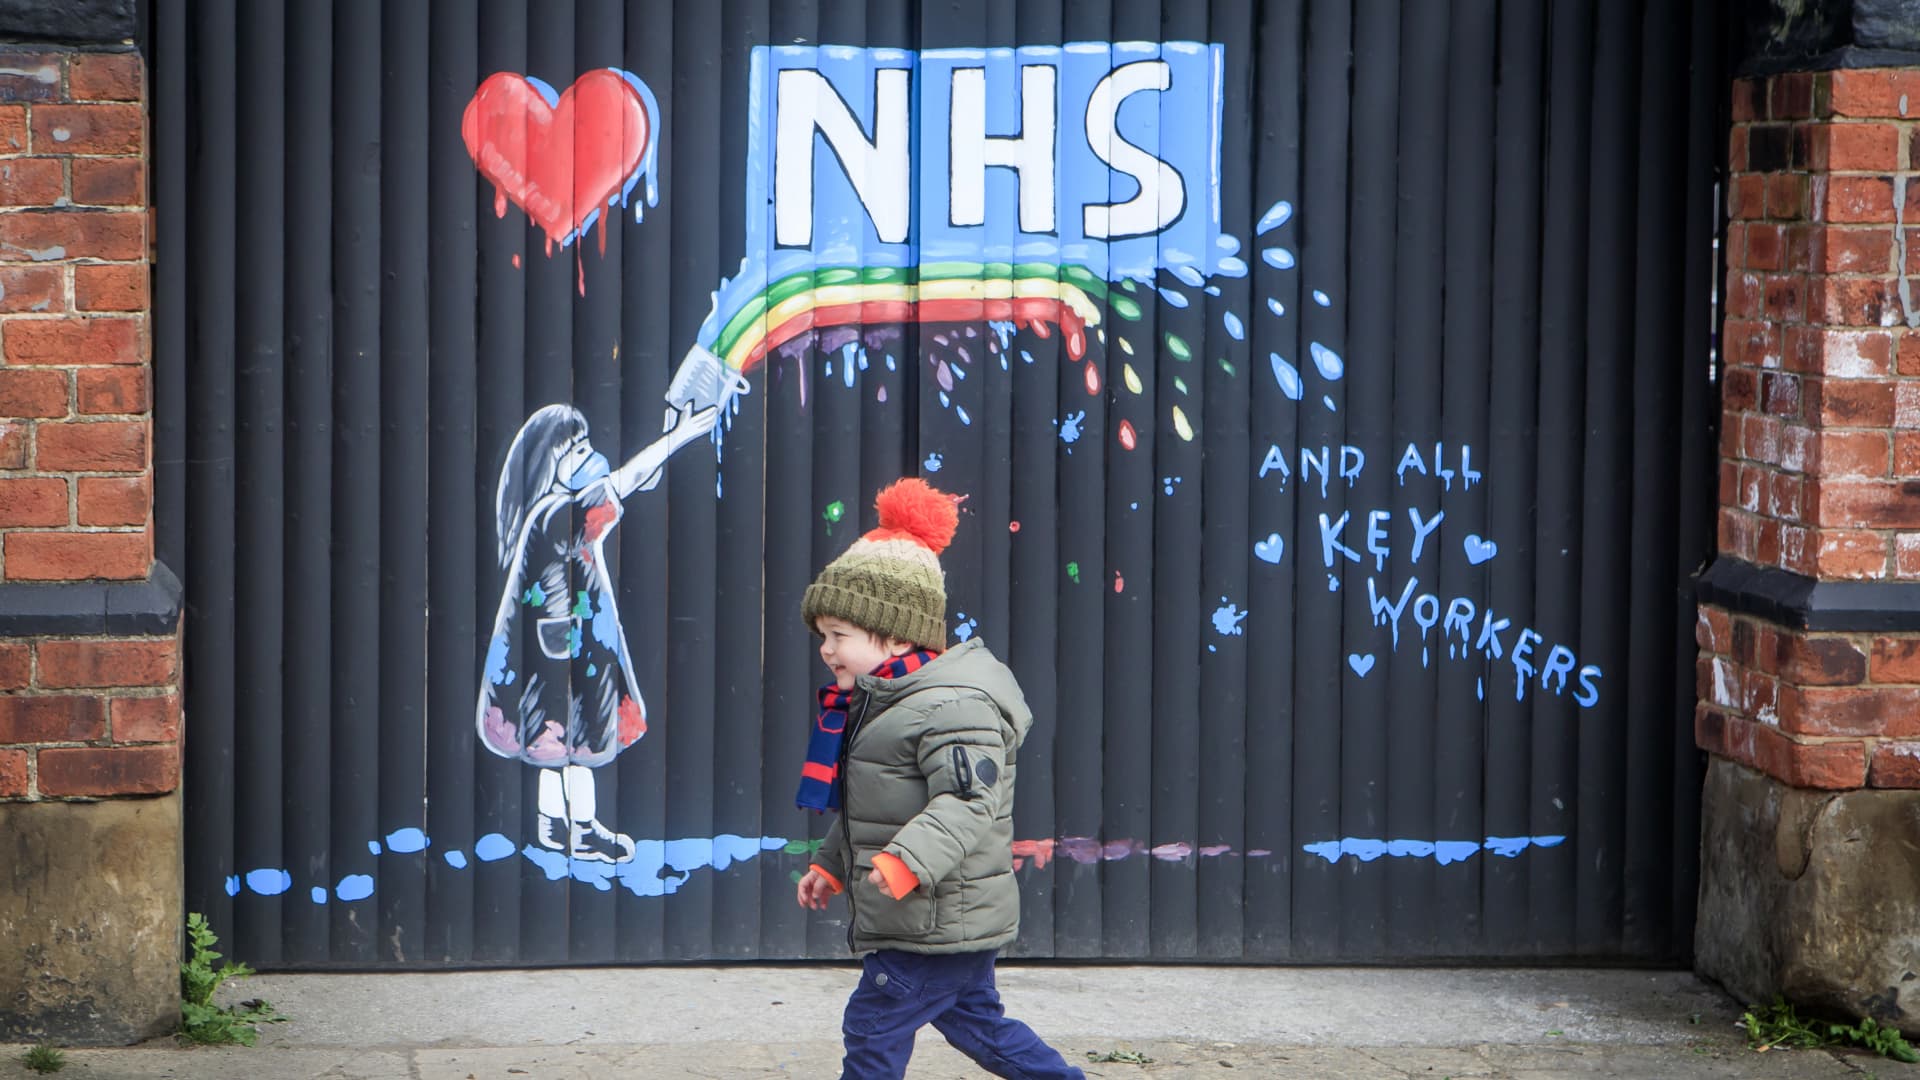 A boy runs past a mural supporting the NHS, by artist Rachel List, on the gates of the Hope & Anchor pub in Pontefract, Yorkshire, as the UK continues in lockdown to help curb the spread of the coronavirus.